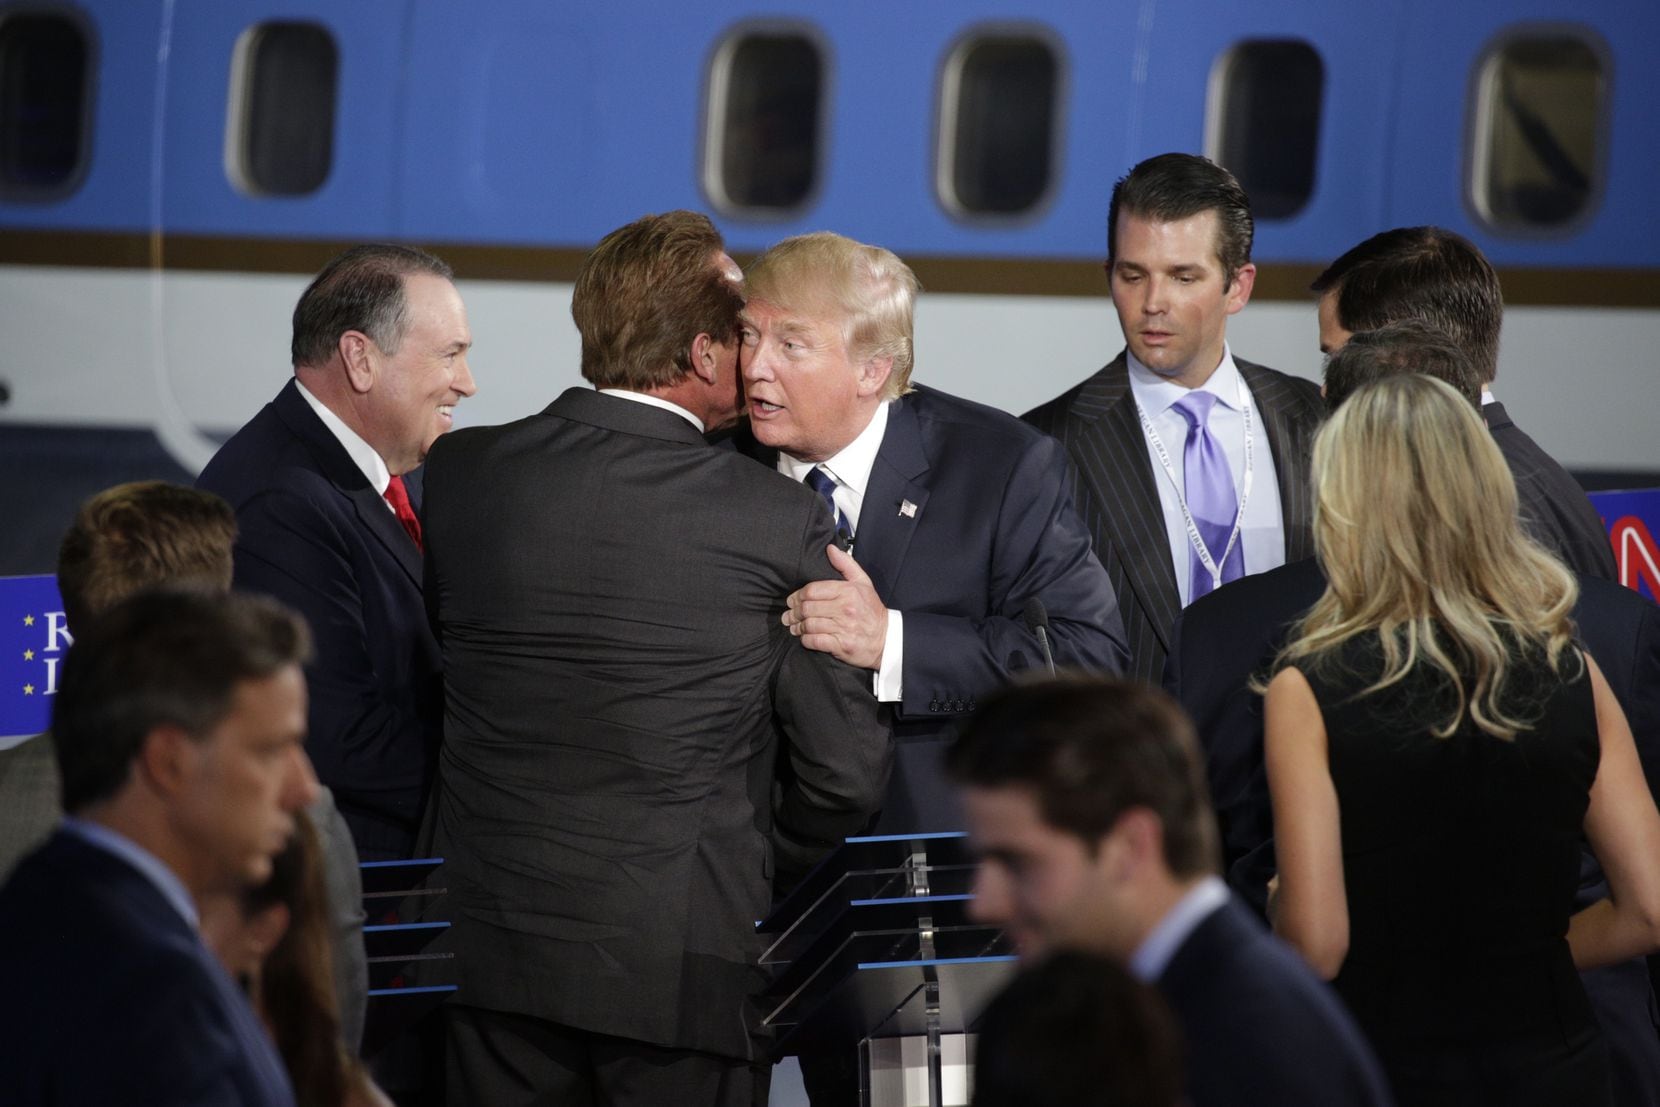 Arnold Schwarzenegger and Donald Trump share a hug at a Republican presidential debate at the Ronald Reagan Presidential Library in Simi Valley, Calif., on Sept. 16, 2015. Schwarzenegger was there as a spectator.